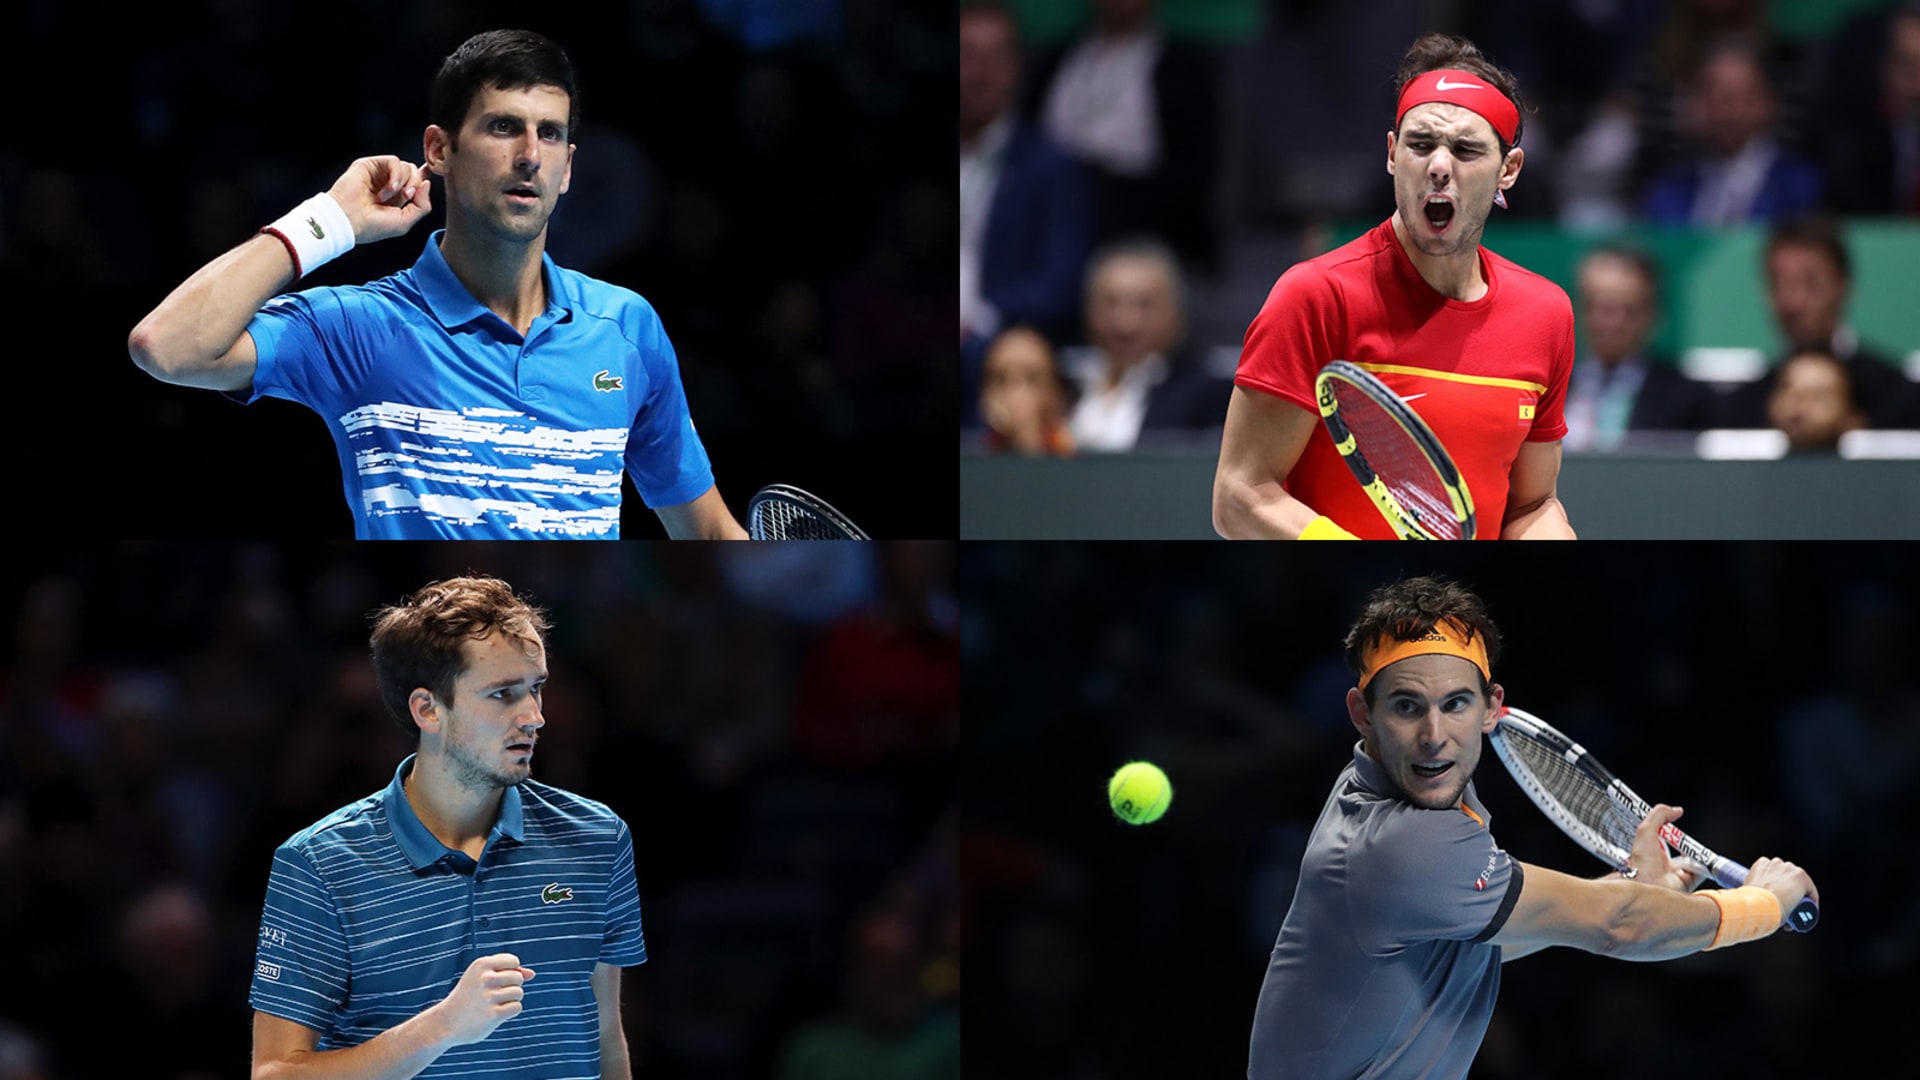 ATP Cup breakdown how does it work, whos playing and whats at stake?